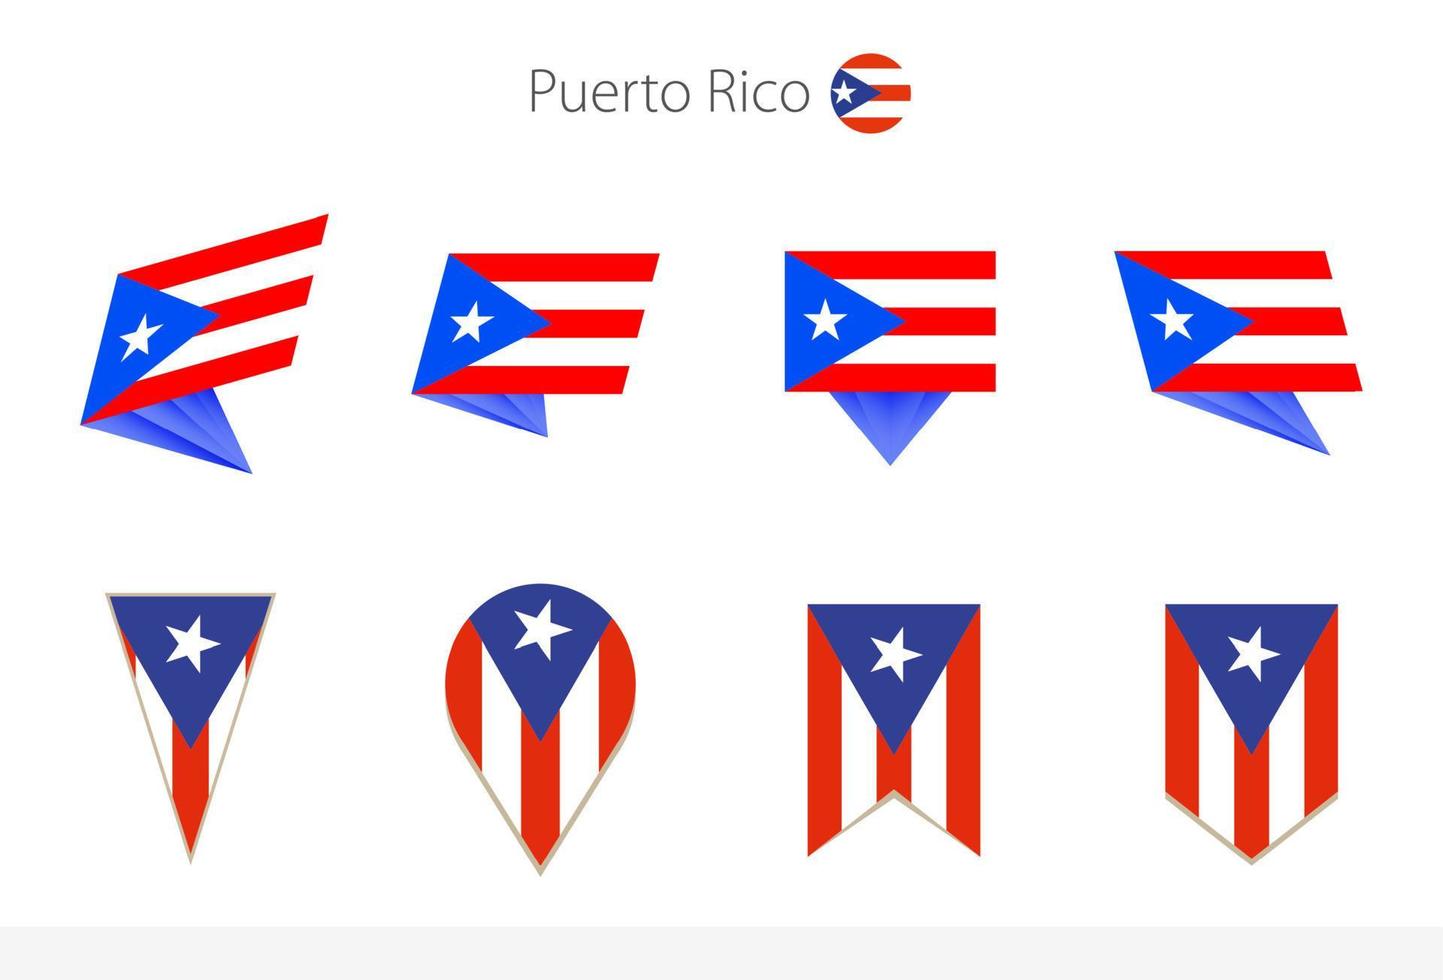 Puerto Rico national flag collection, eight versions of Puerto Rico vector flags.